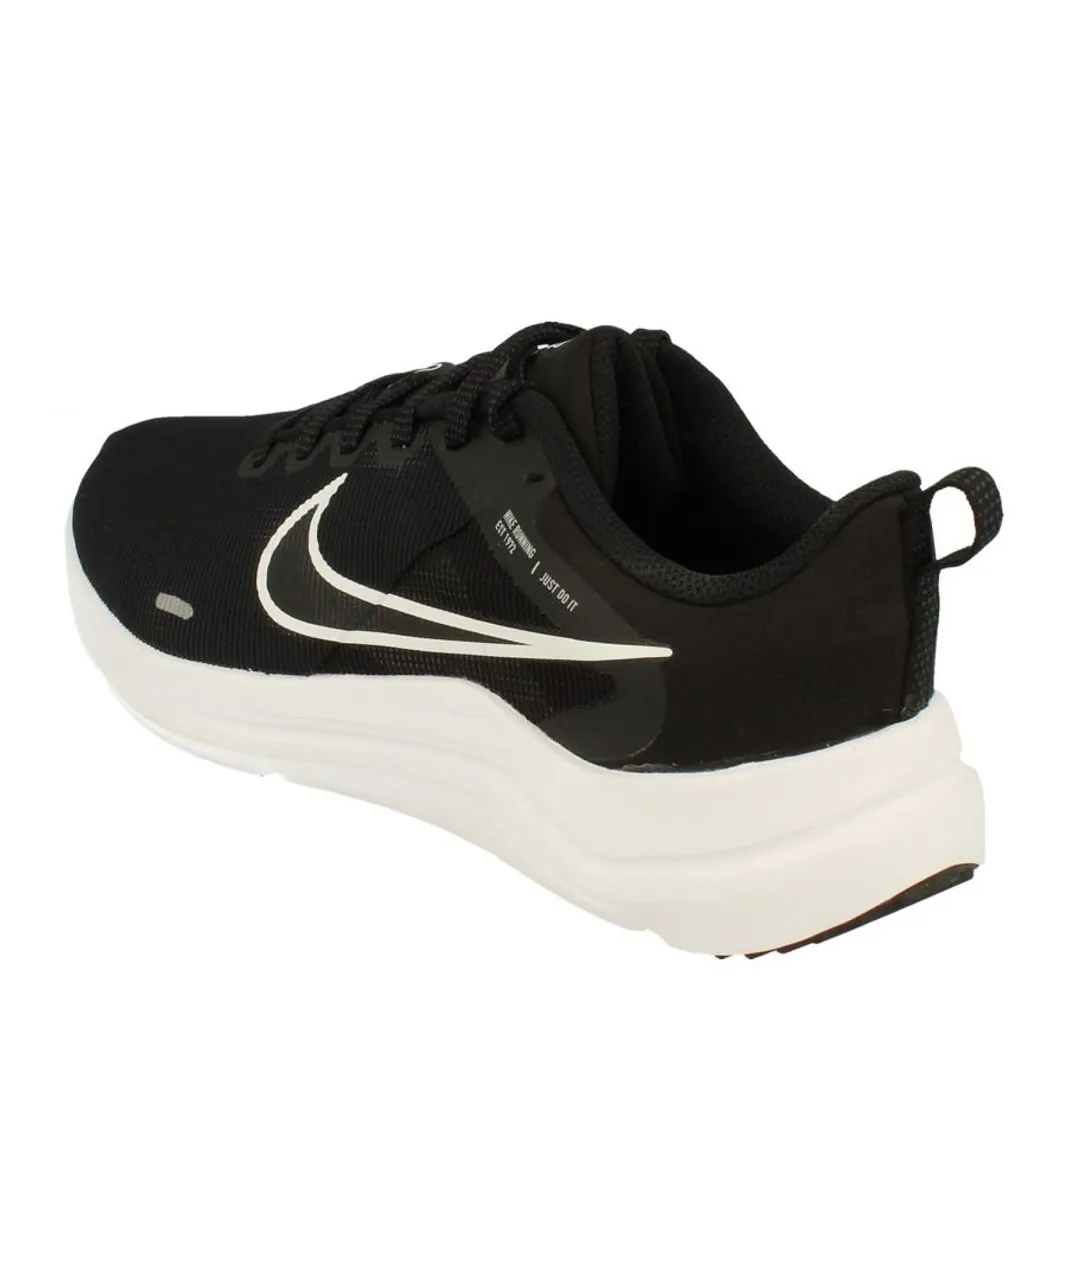 Nike Downshifter 12 Mens Black Trainers